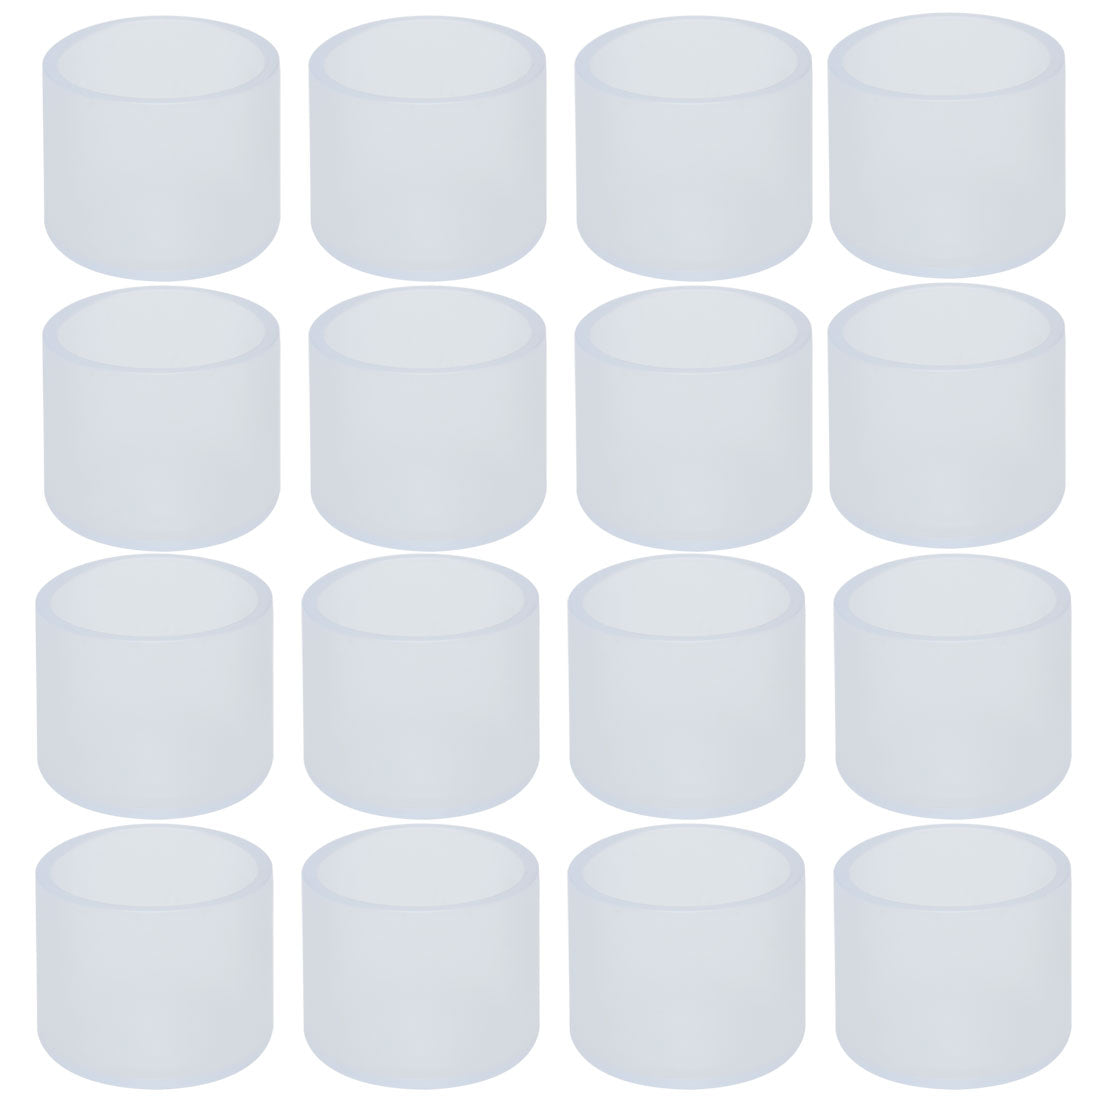 uxcell Uxcell Clear PVC Chair Leg Caps End Tip Feet Furniture Glide Floor Protector 16pcs